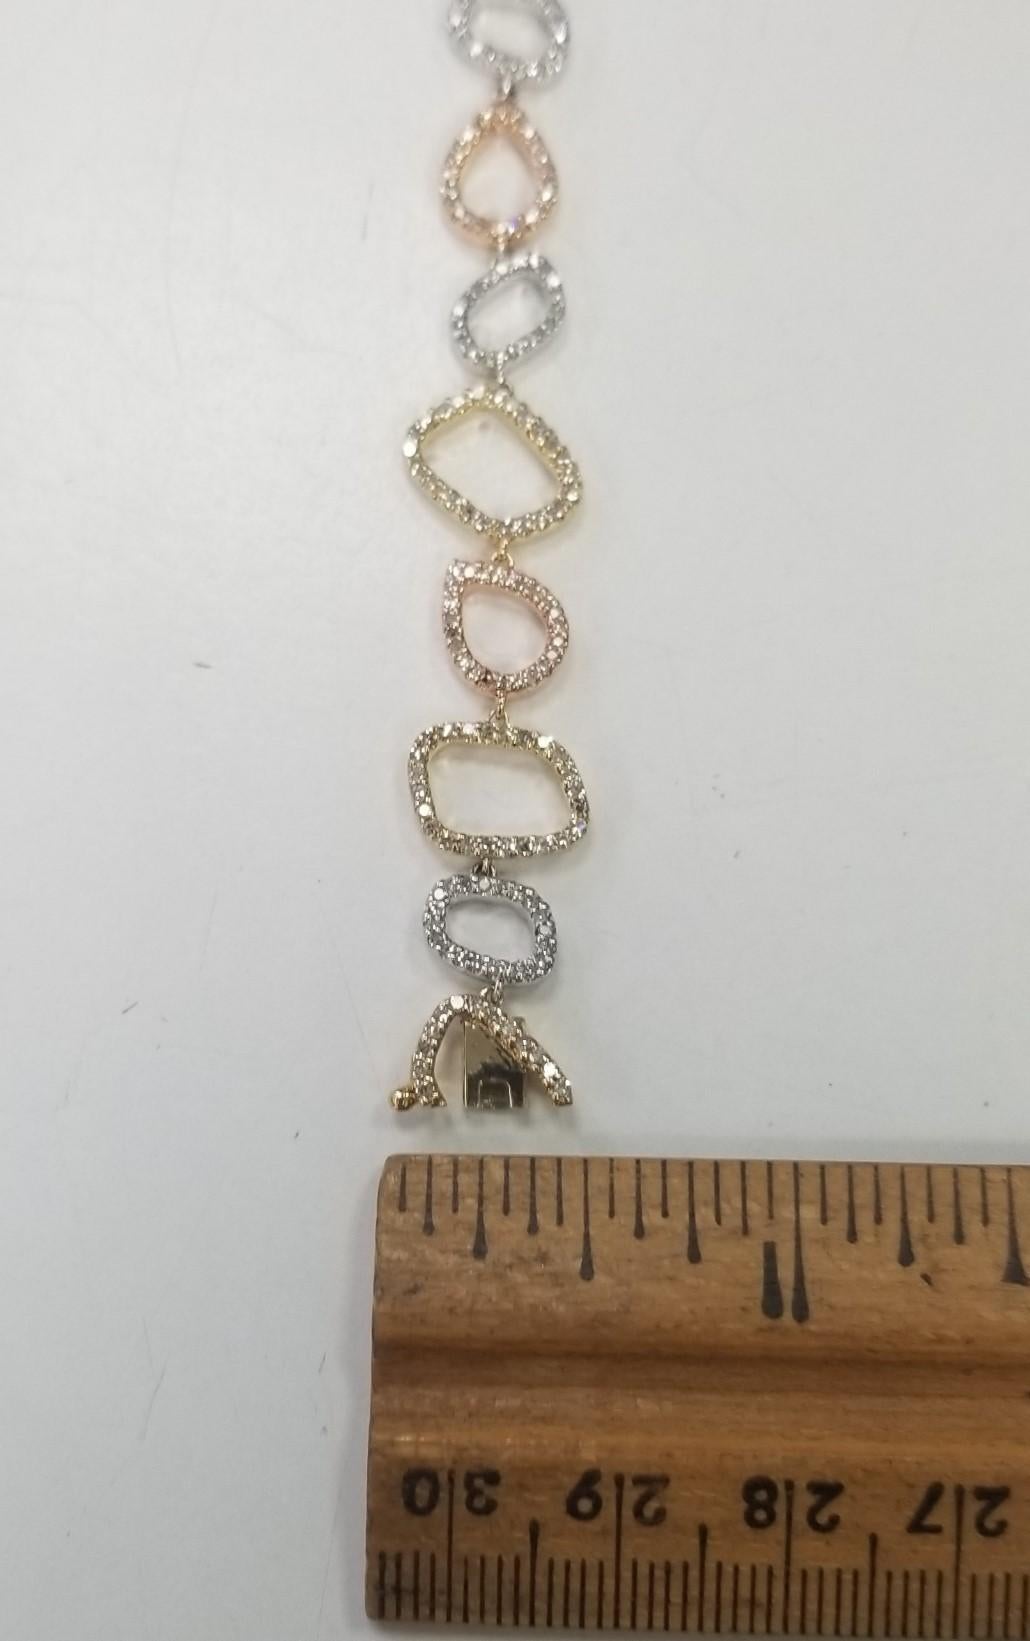 Specifications:
Custom made in Los Angeles, CA
Metal: 14K Yellow, White and Rose Gold   
Weight: 1.80 Gr
Main Stone: single cut Round diamond 1.80cttw  
Color: G
Clarity: Vs
Length: 7 Inch